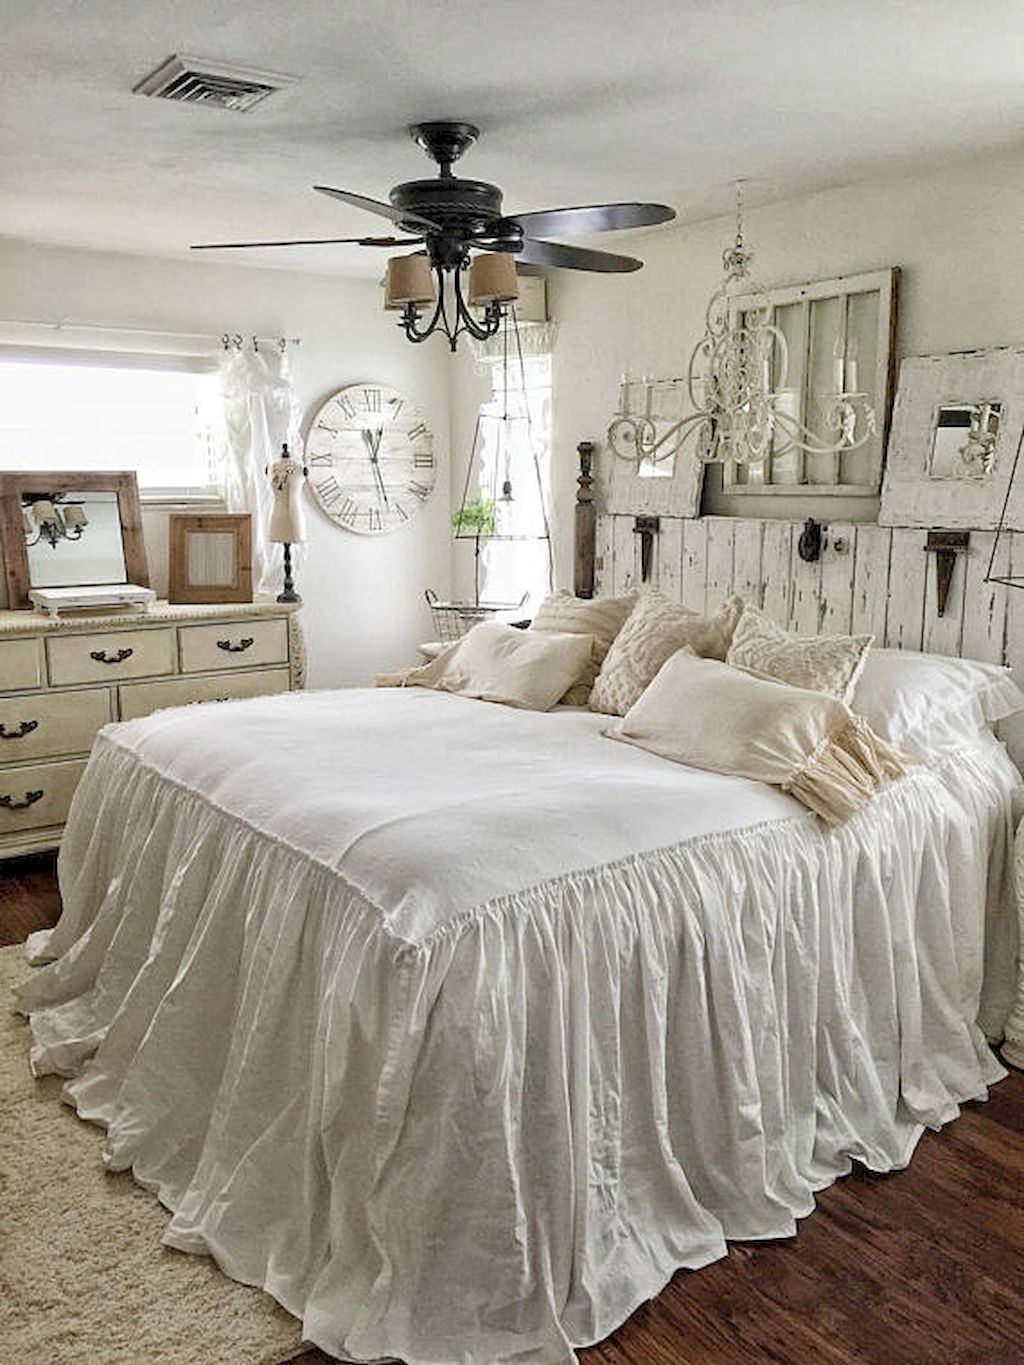 Shabby Chic Master Bedroom
 Cool 30 Romantic Shabby Chic Master Bedroom Ideas colors